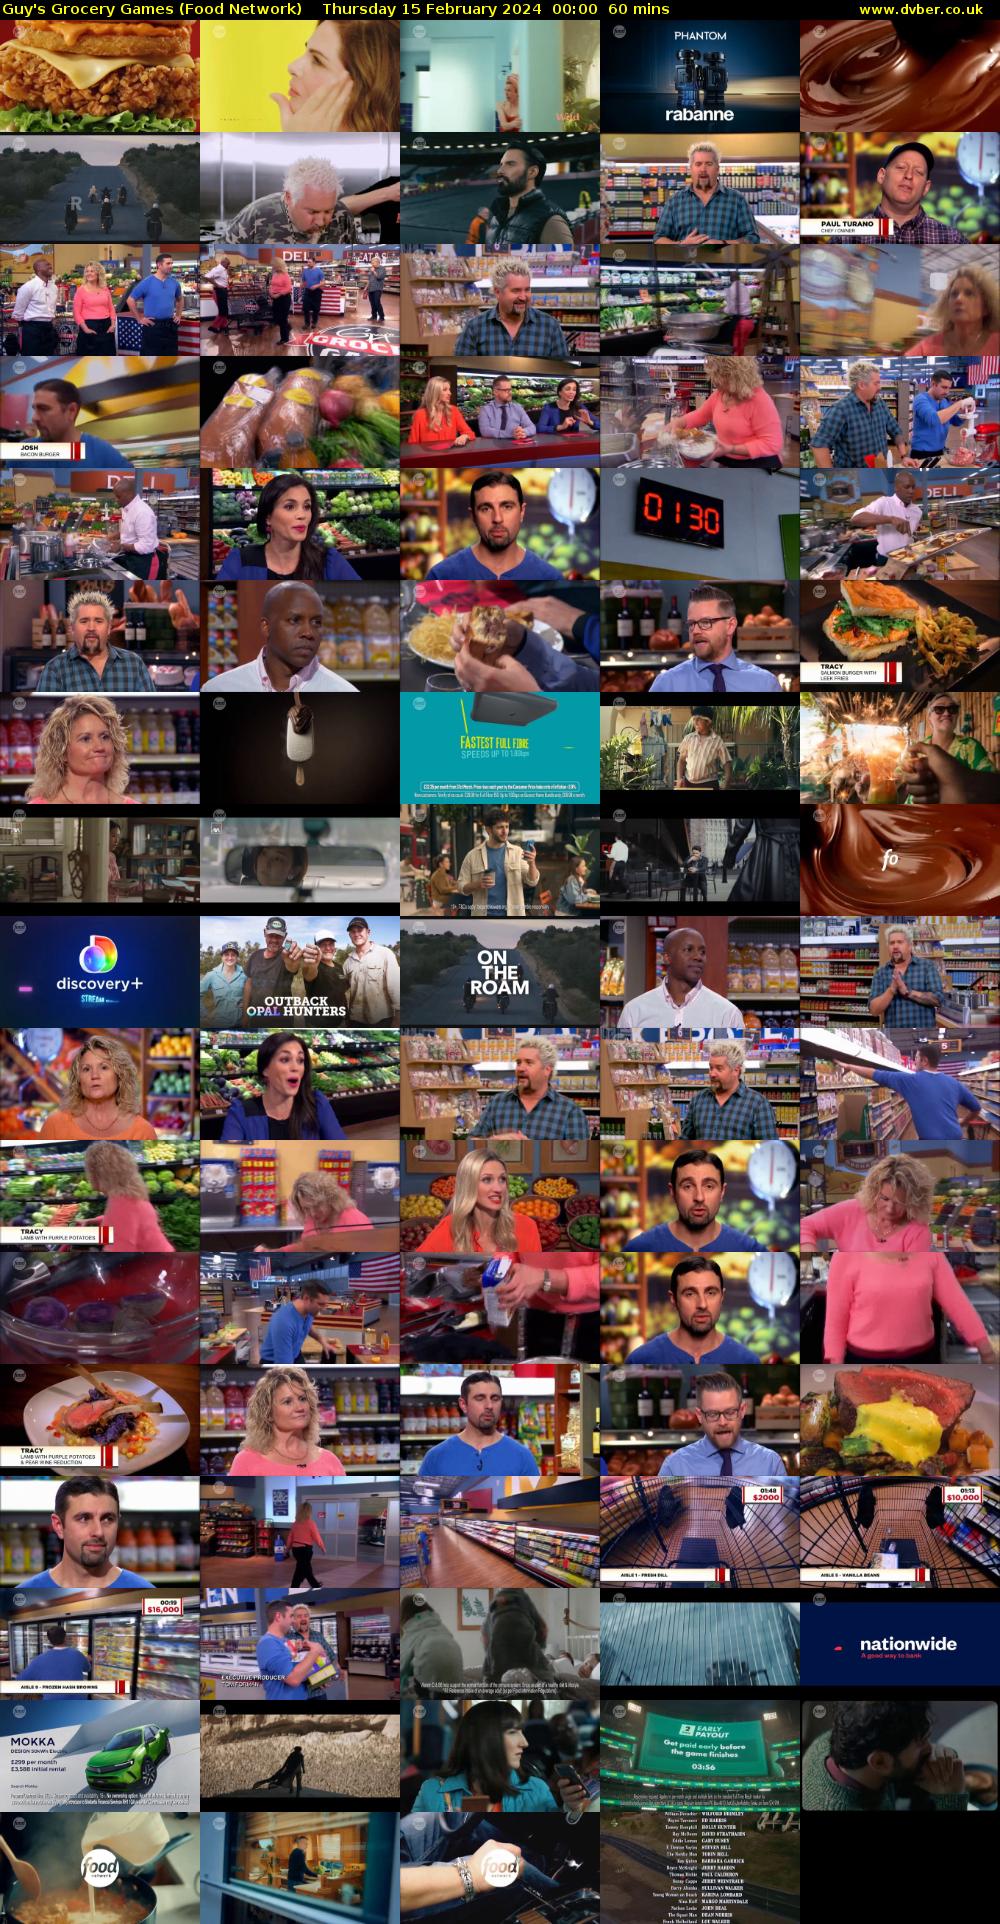 Guy's Grocery Games (Food Network) Thursday 15 February 2024 00:00 - 01:00